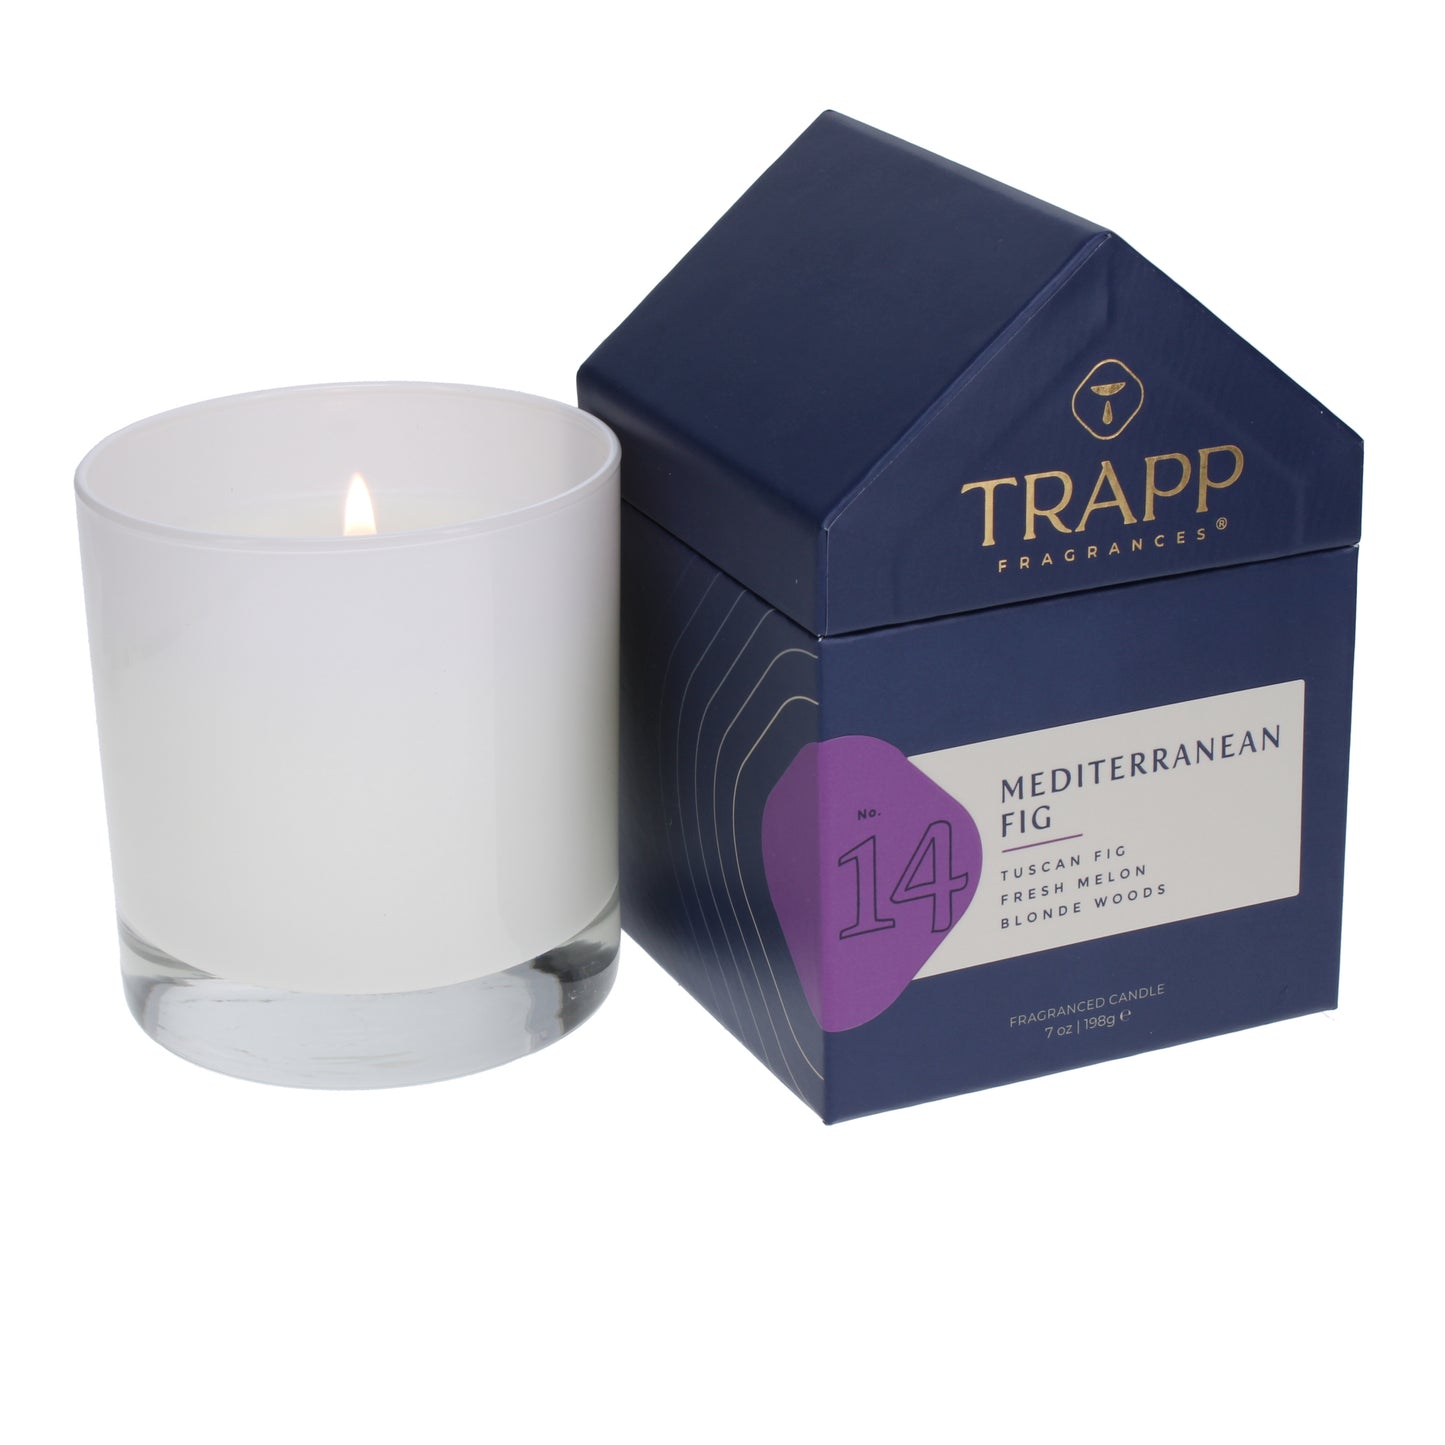 No. 14 Mediterranean Fig 7 oz. Candle in House Box Image 2